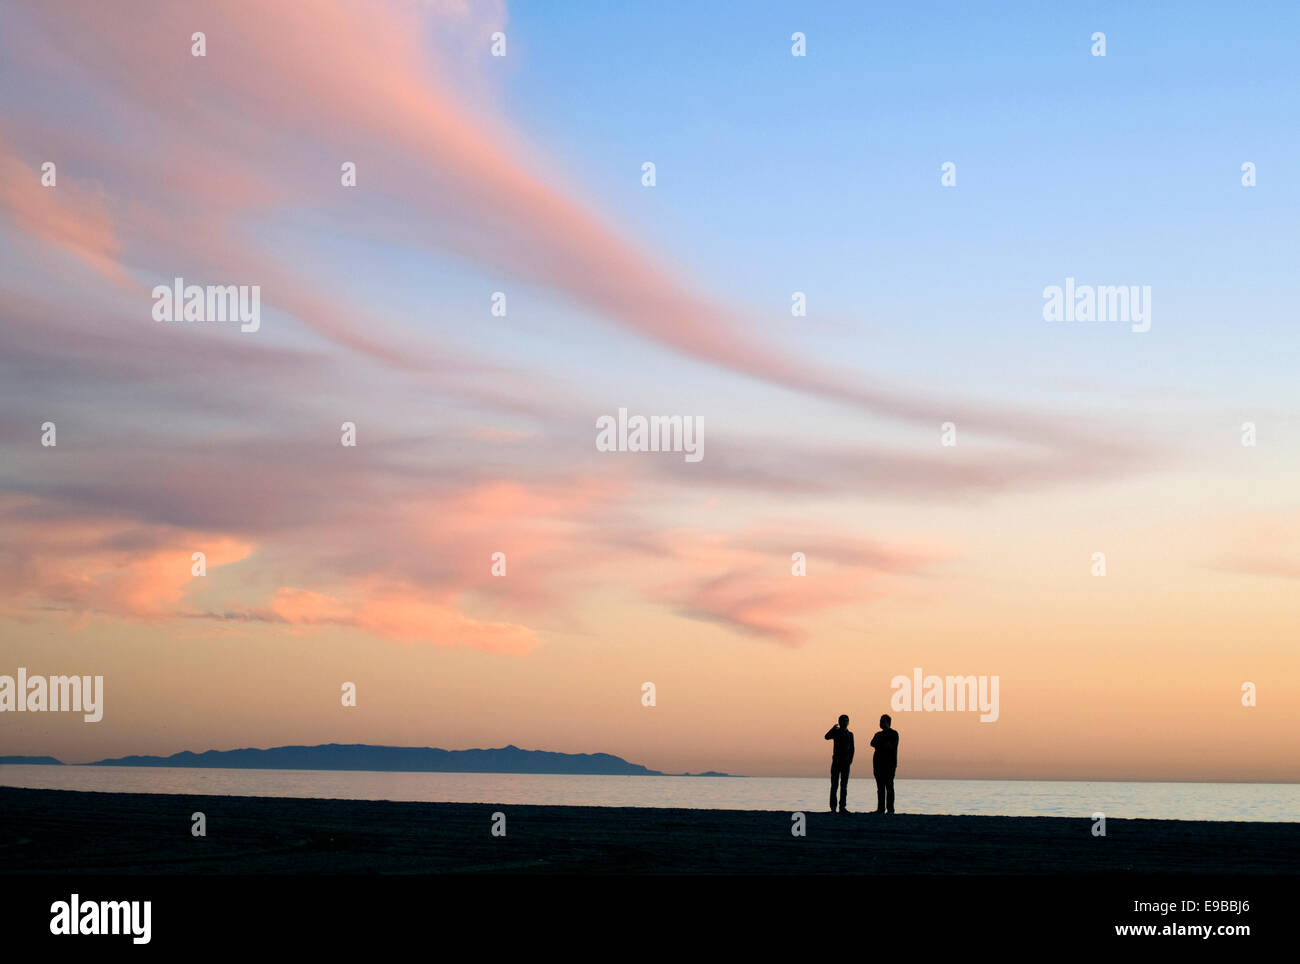 People on beach at sunset at Santa Monica with view of Palos Verdes Peninsula in Southern California Stock Photo